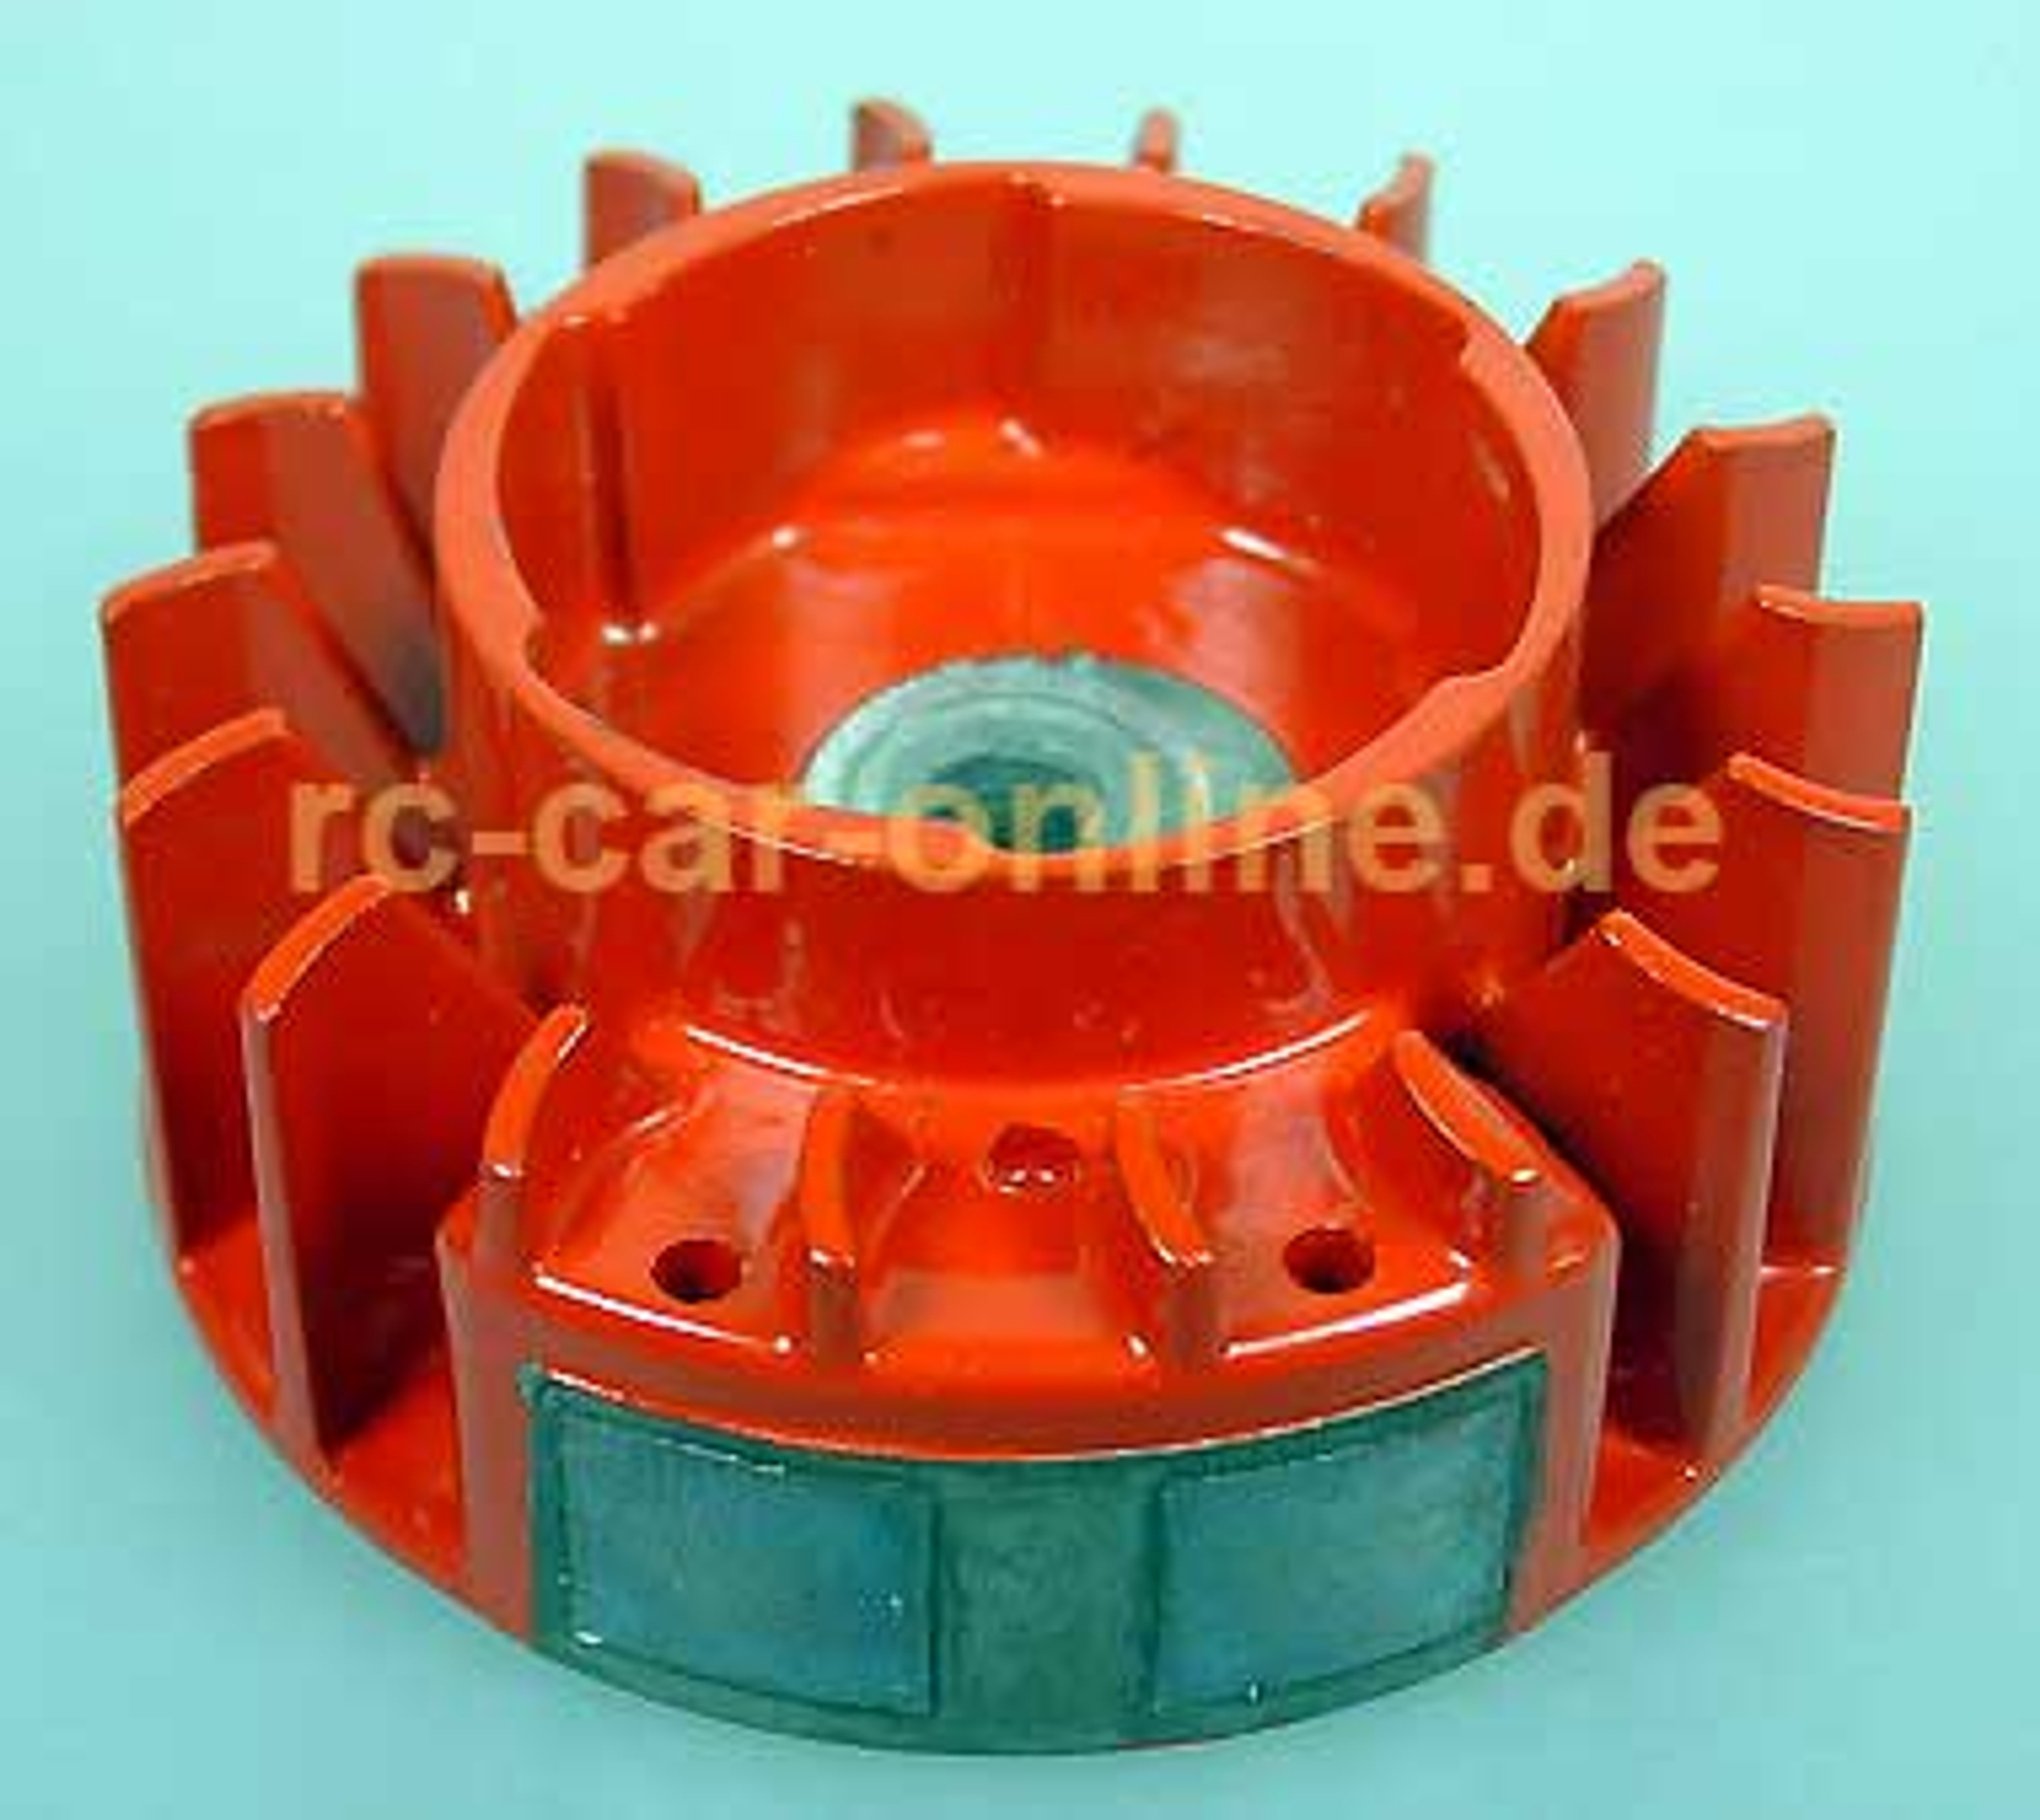 8319/02 FG Tuning cooling fan, red, for Solo - 1pce.